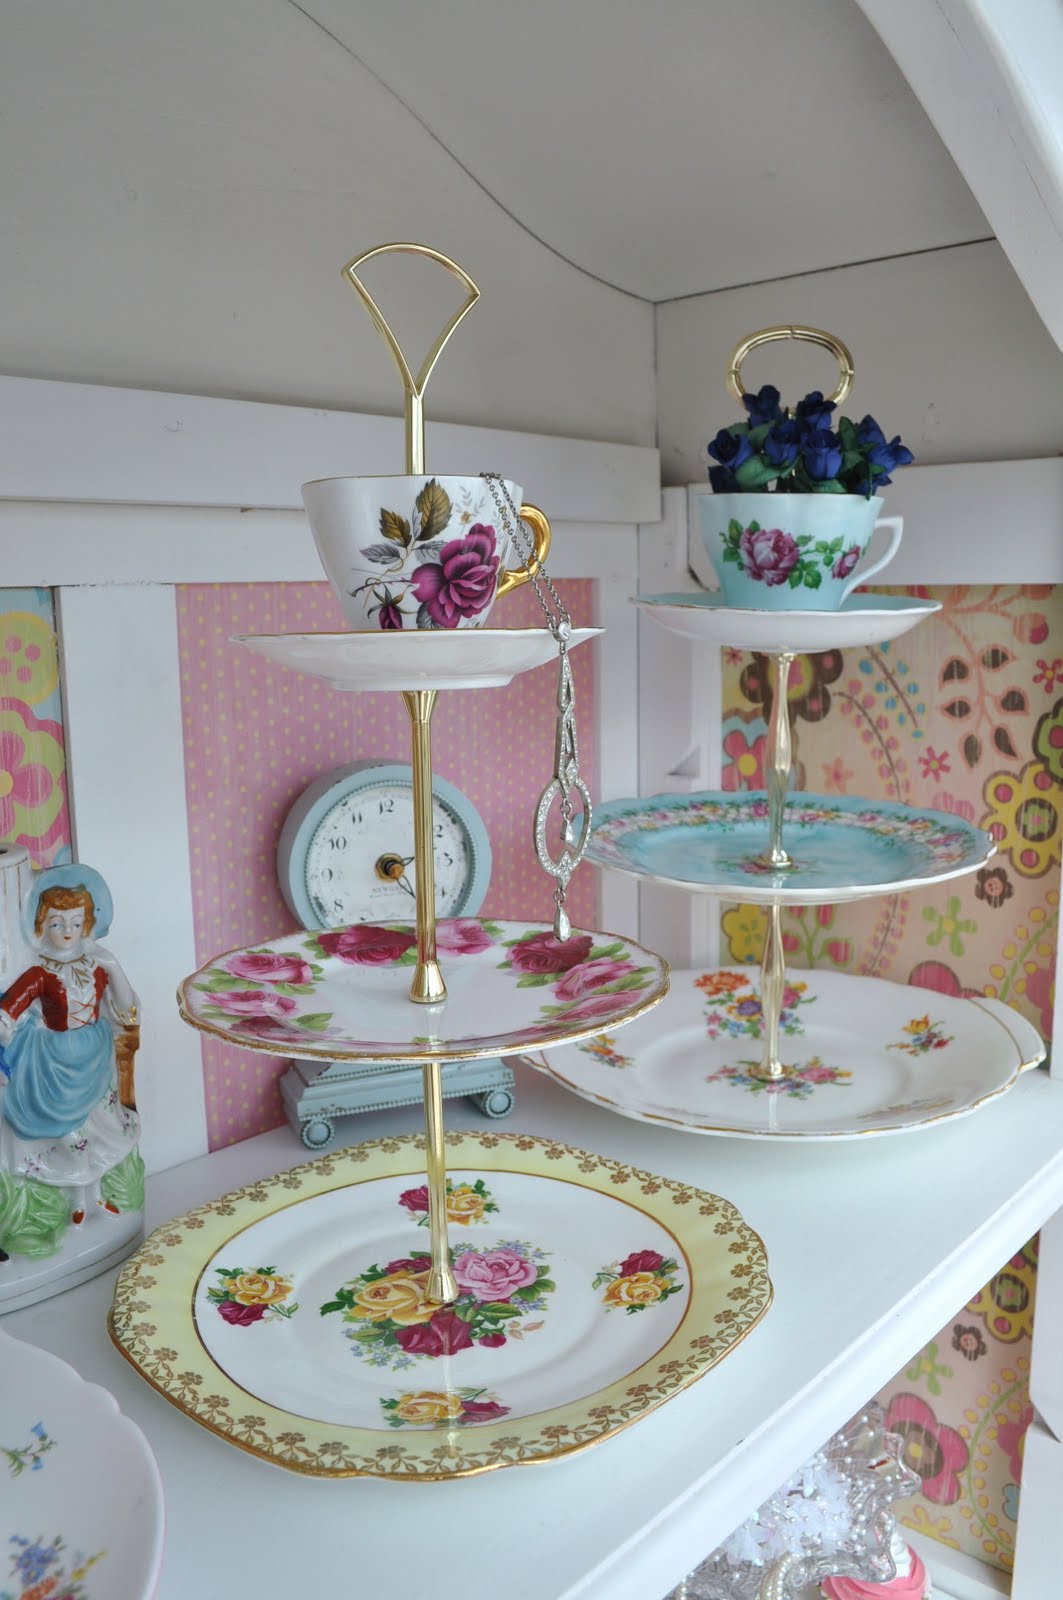 cake stand heaven: A Very Warm Welcome to Cake Stand Heaven